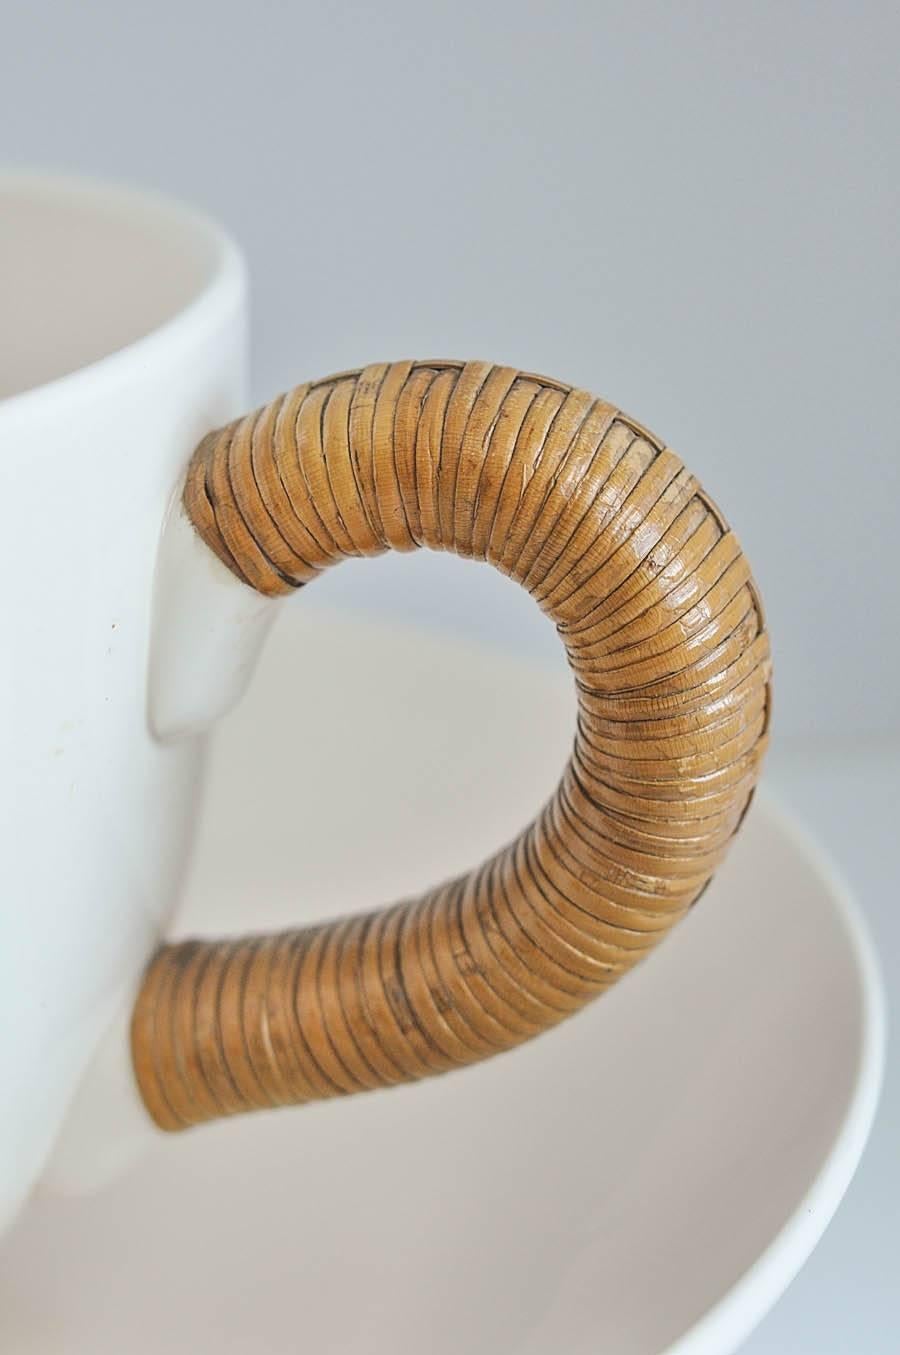 A large-scale replica of a cup and saucer with a wrapped rattan handle by the American Industrial designer Ed Langbein. By altering the scale of an everyday object and elevating it to sculpture, Langbein seems to signal the beginnings of the Op Art